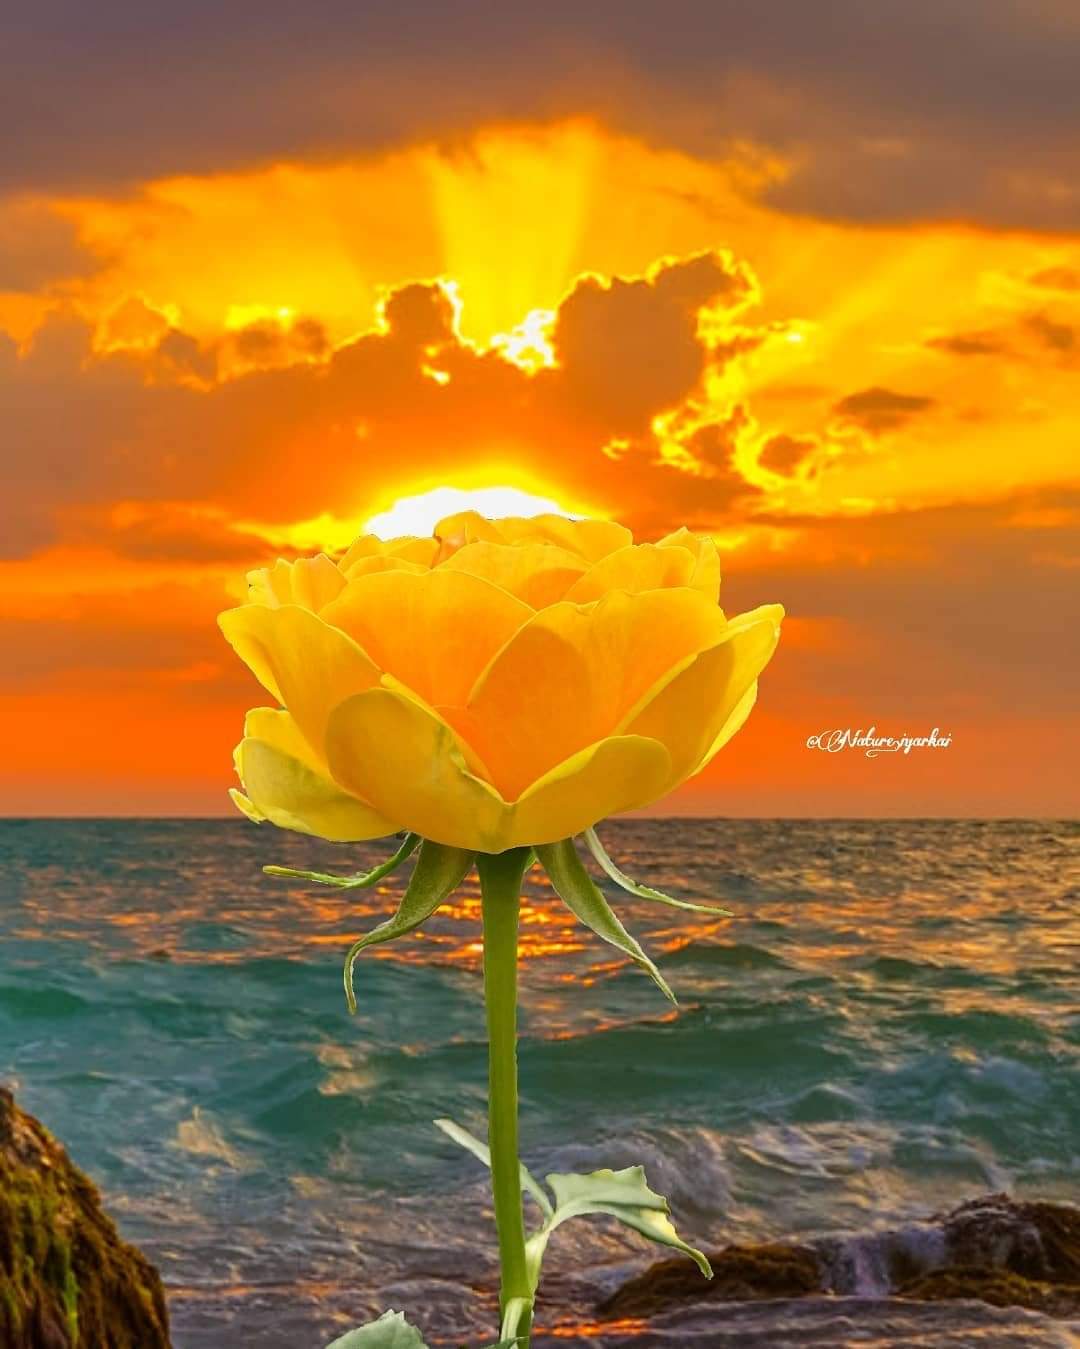 A yellow flower in front of the ocean and sunset.